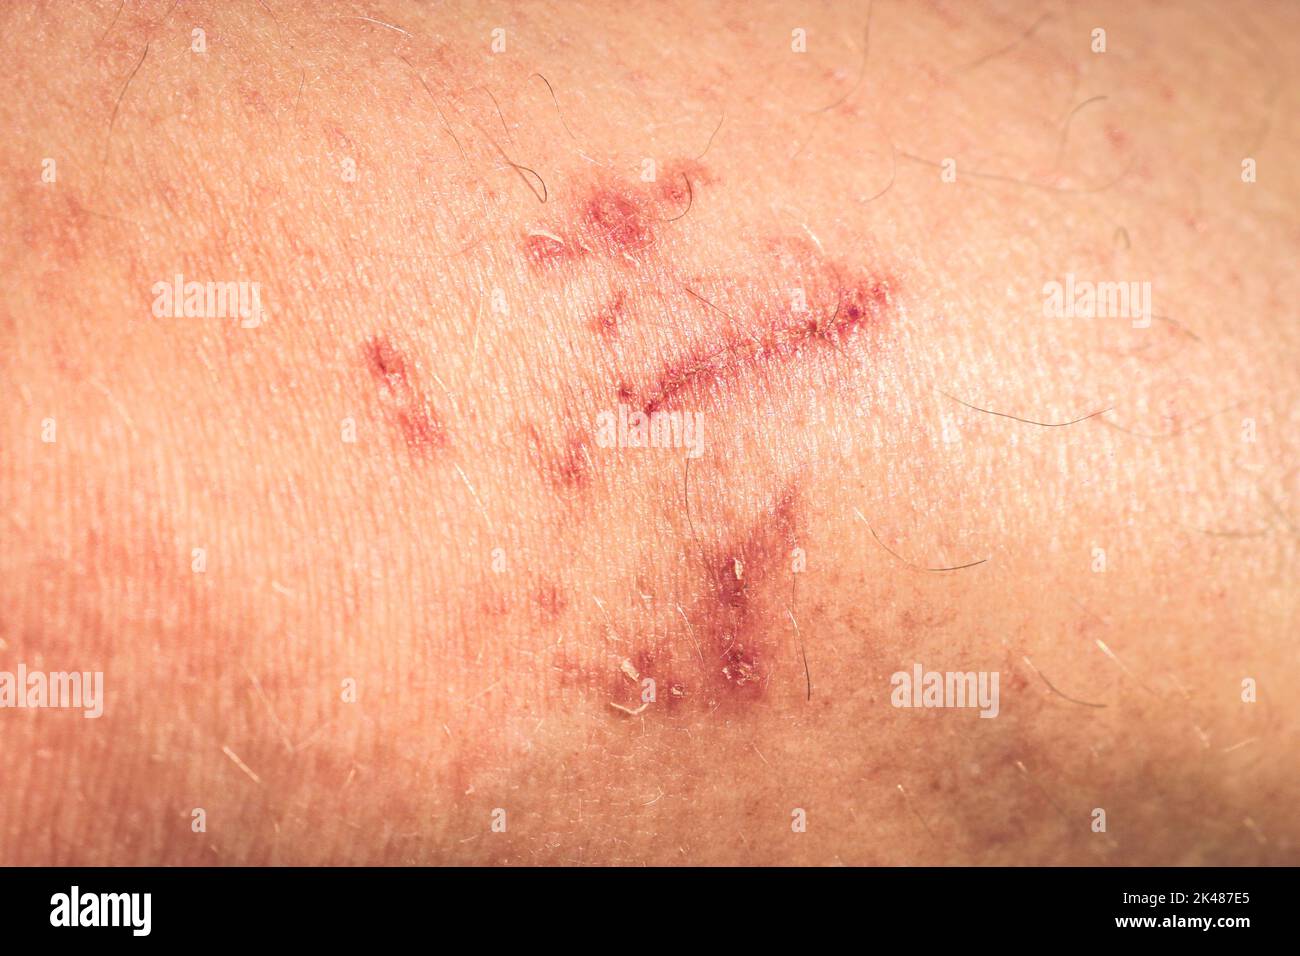 Close-up of scratches on the knee after a fall from a bicycle. Wound on the skin. Stock Photo